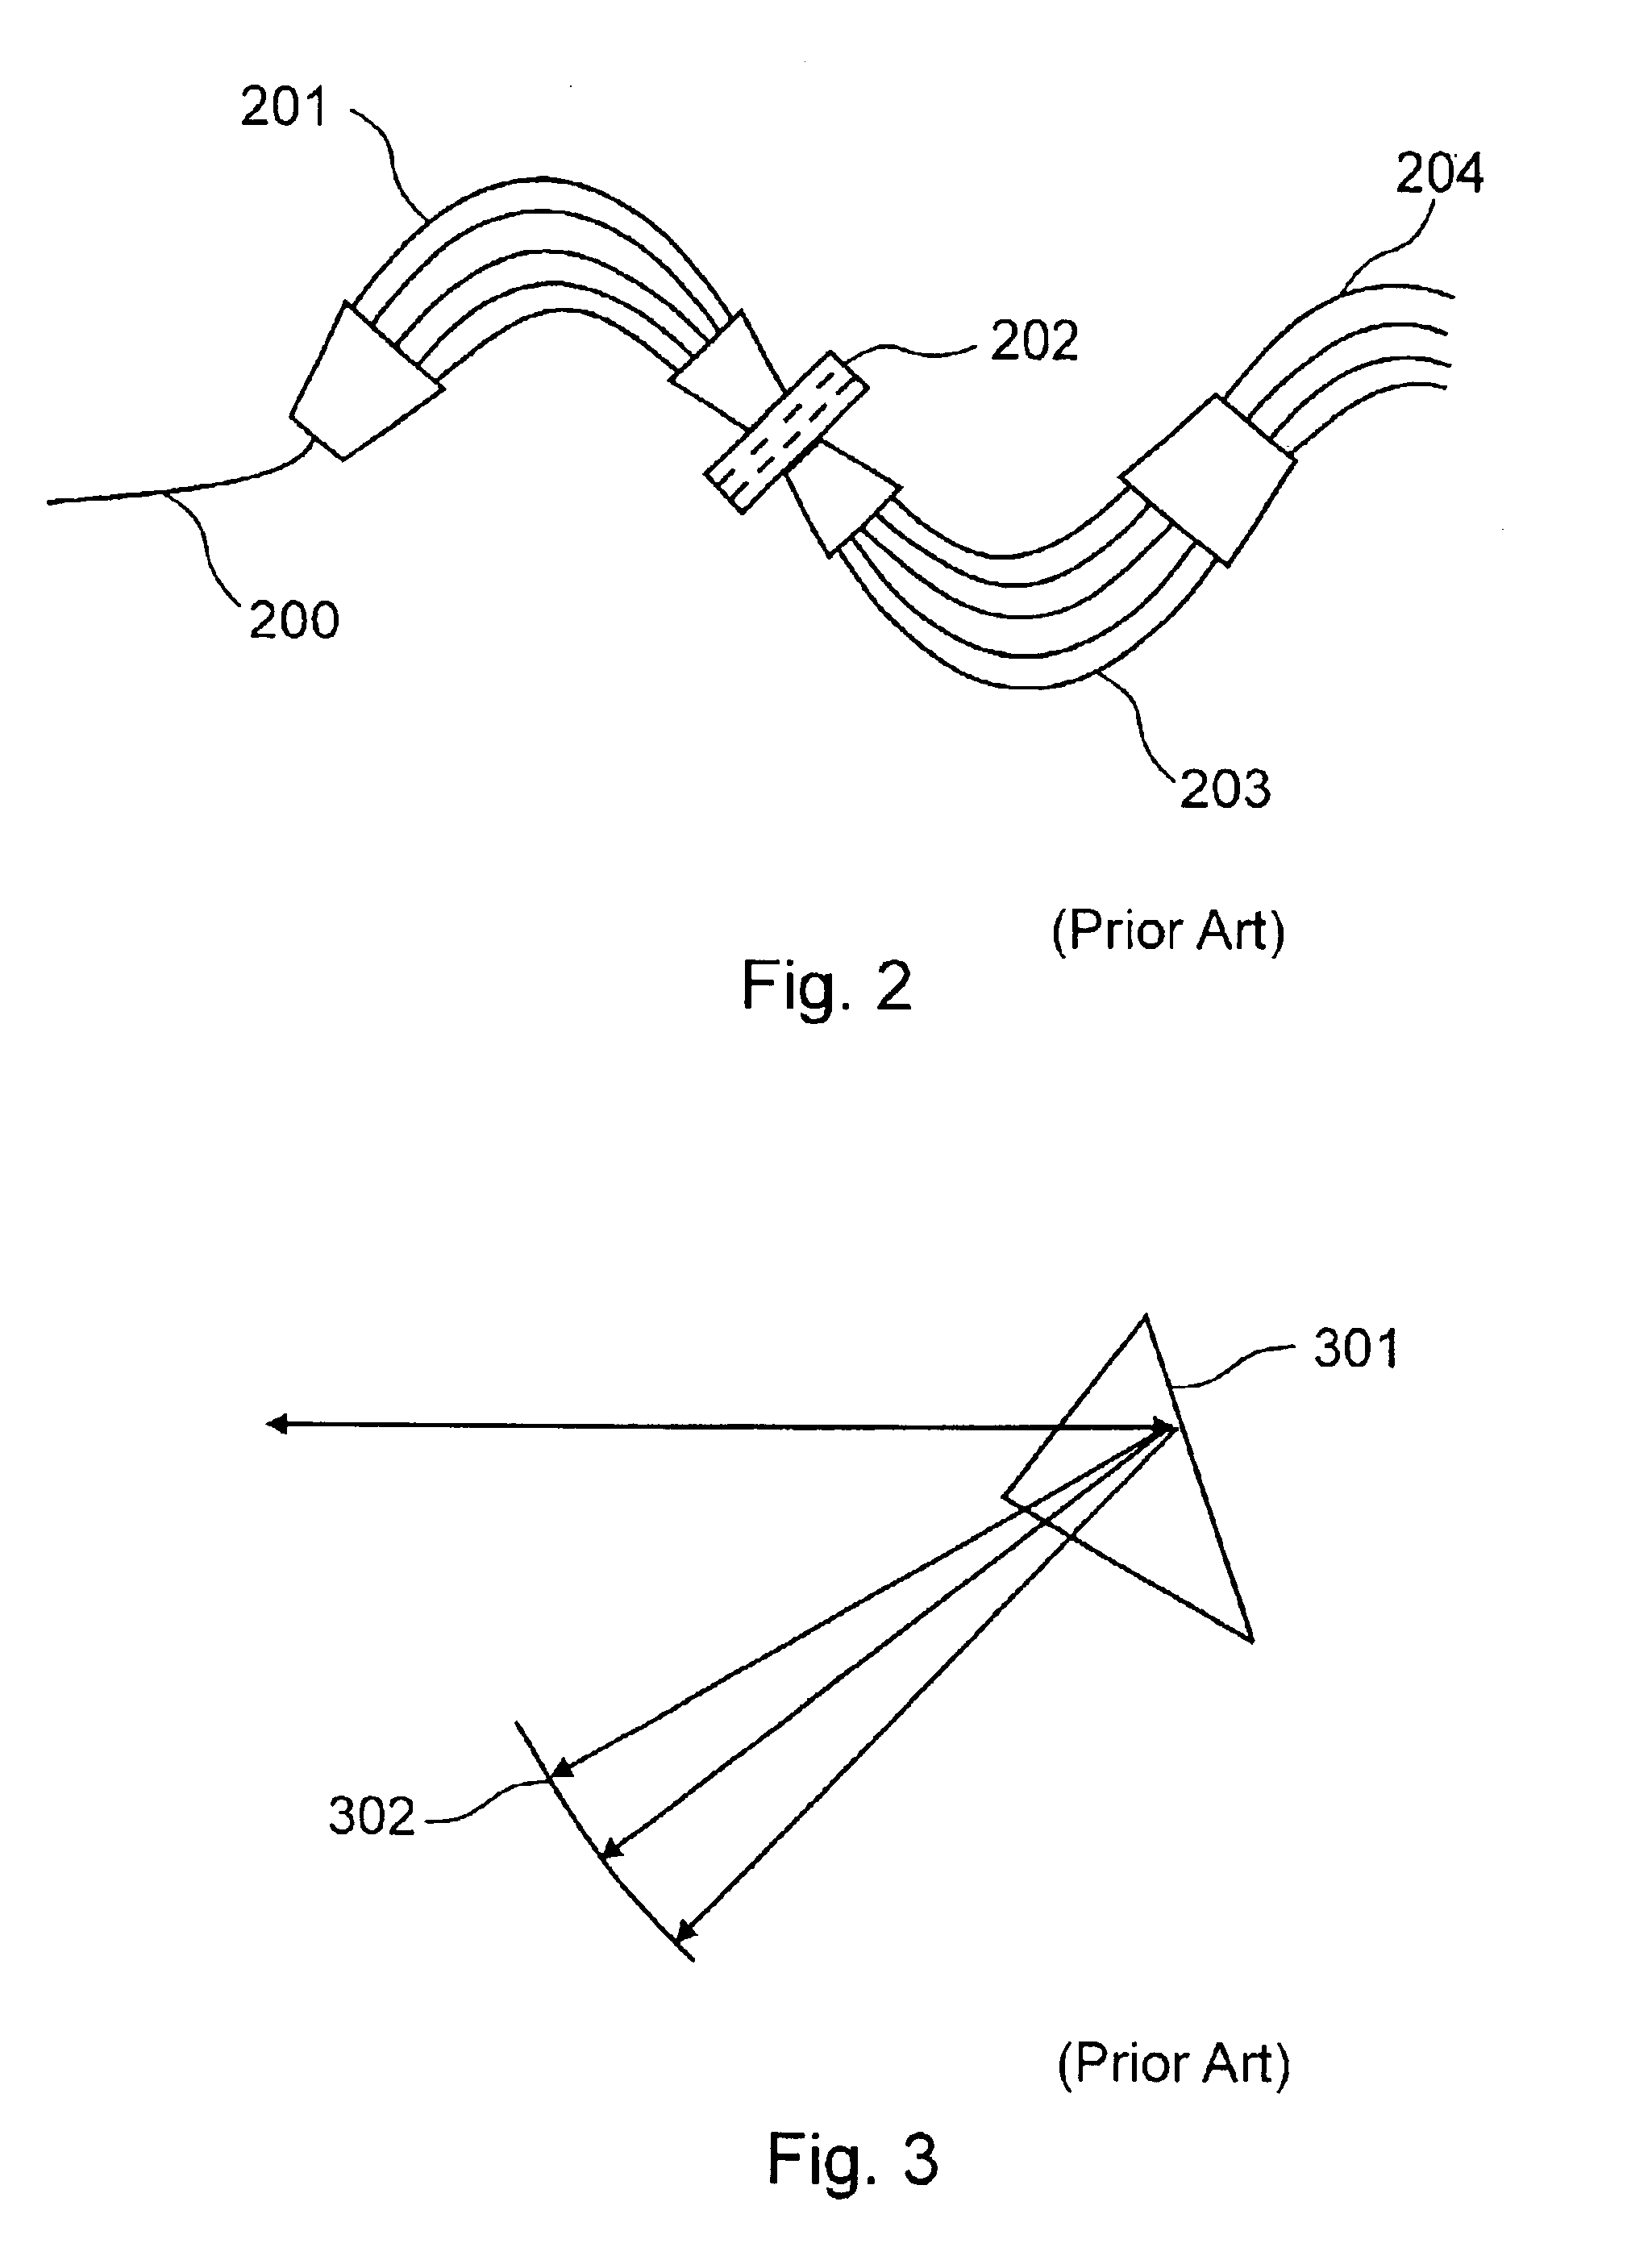 Passband flattened demultiplexer employing segmented reflectors and other devices derived therefrom